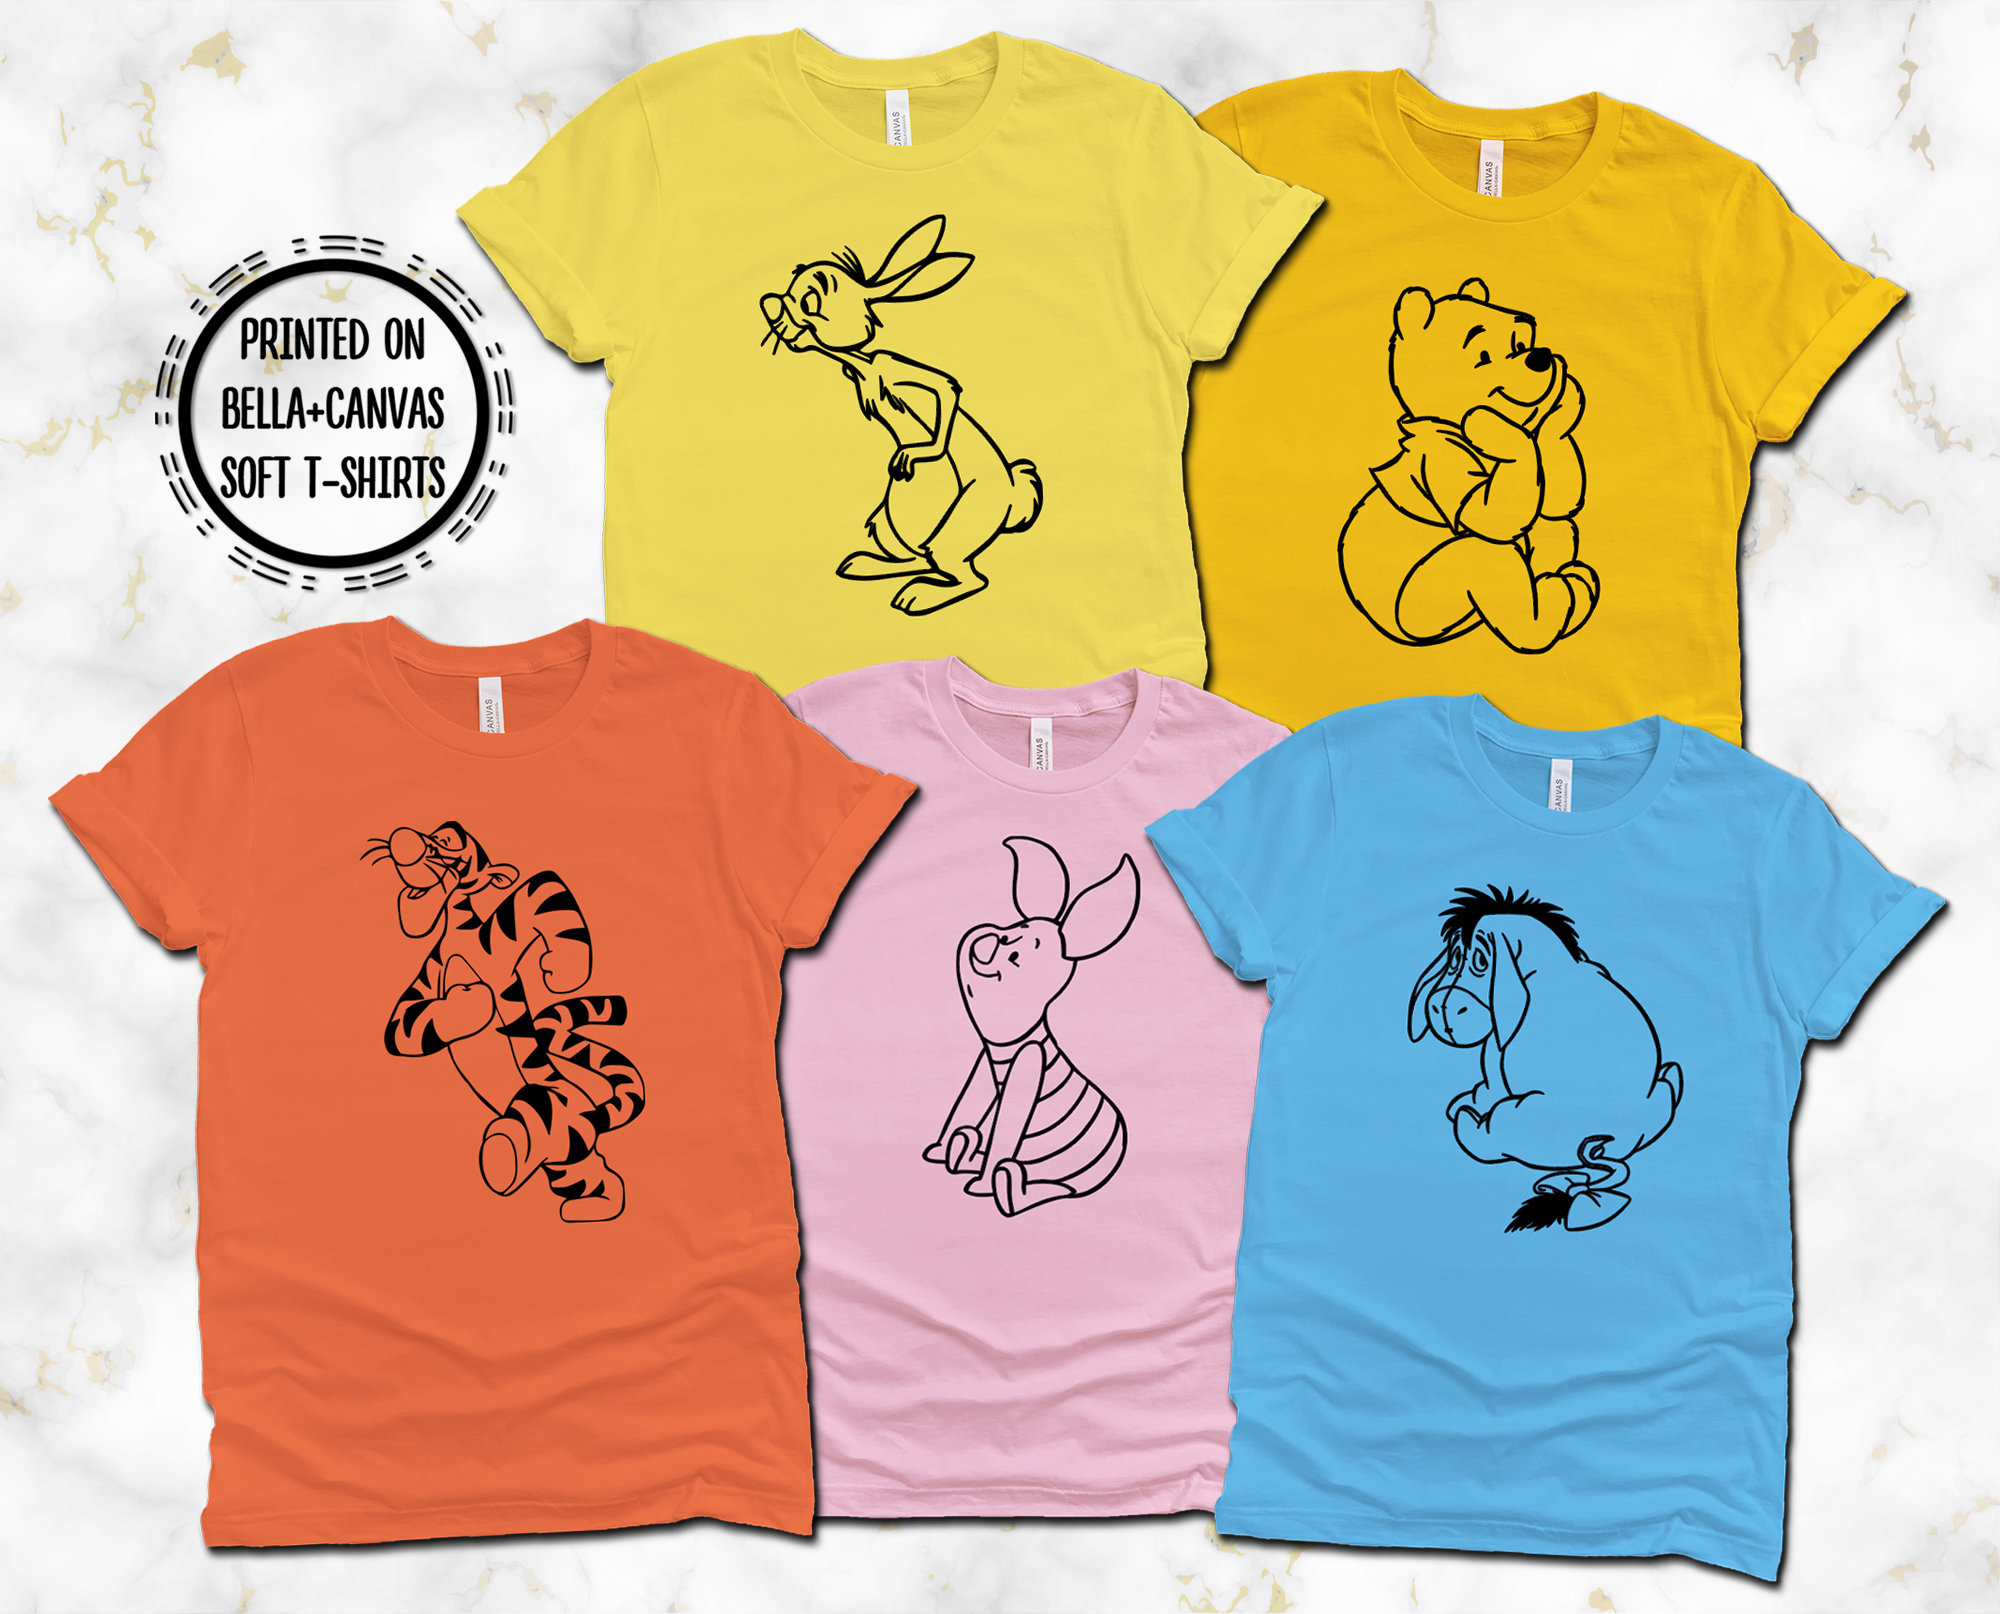 Winnie the Pooh and Friends Bella Tigger, T-shirts Printed Rabbit, on Print - Piglet, T-shirts, Outline Etsy Winnie Pooh, Canvas Eeyore T-shirts